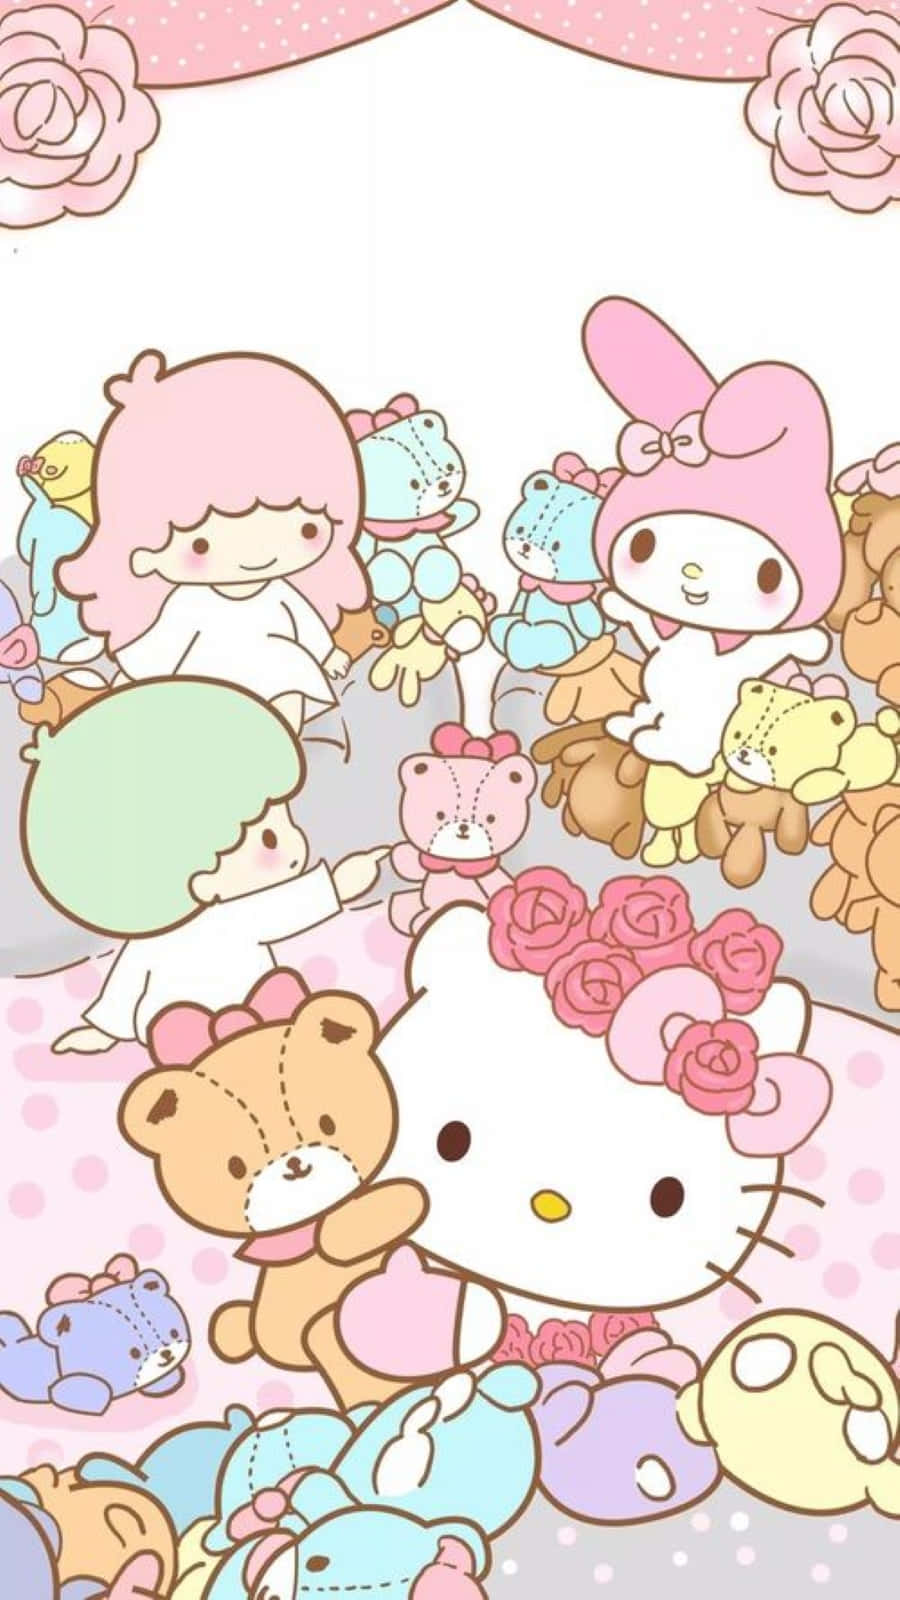 Hello Kitty Friends PNG  hellokittyfriendscoloringsheets hellokitty friendscartoons hellokittyfriendswallpaper hellokittyfriendschristmas   CleanPNG  KissPNG